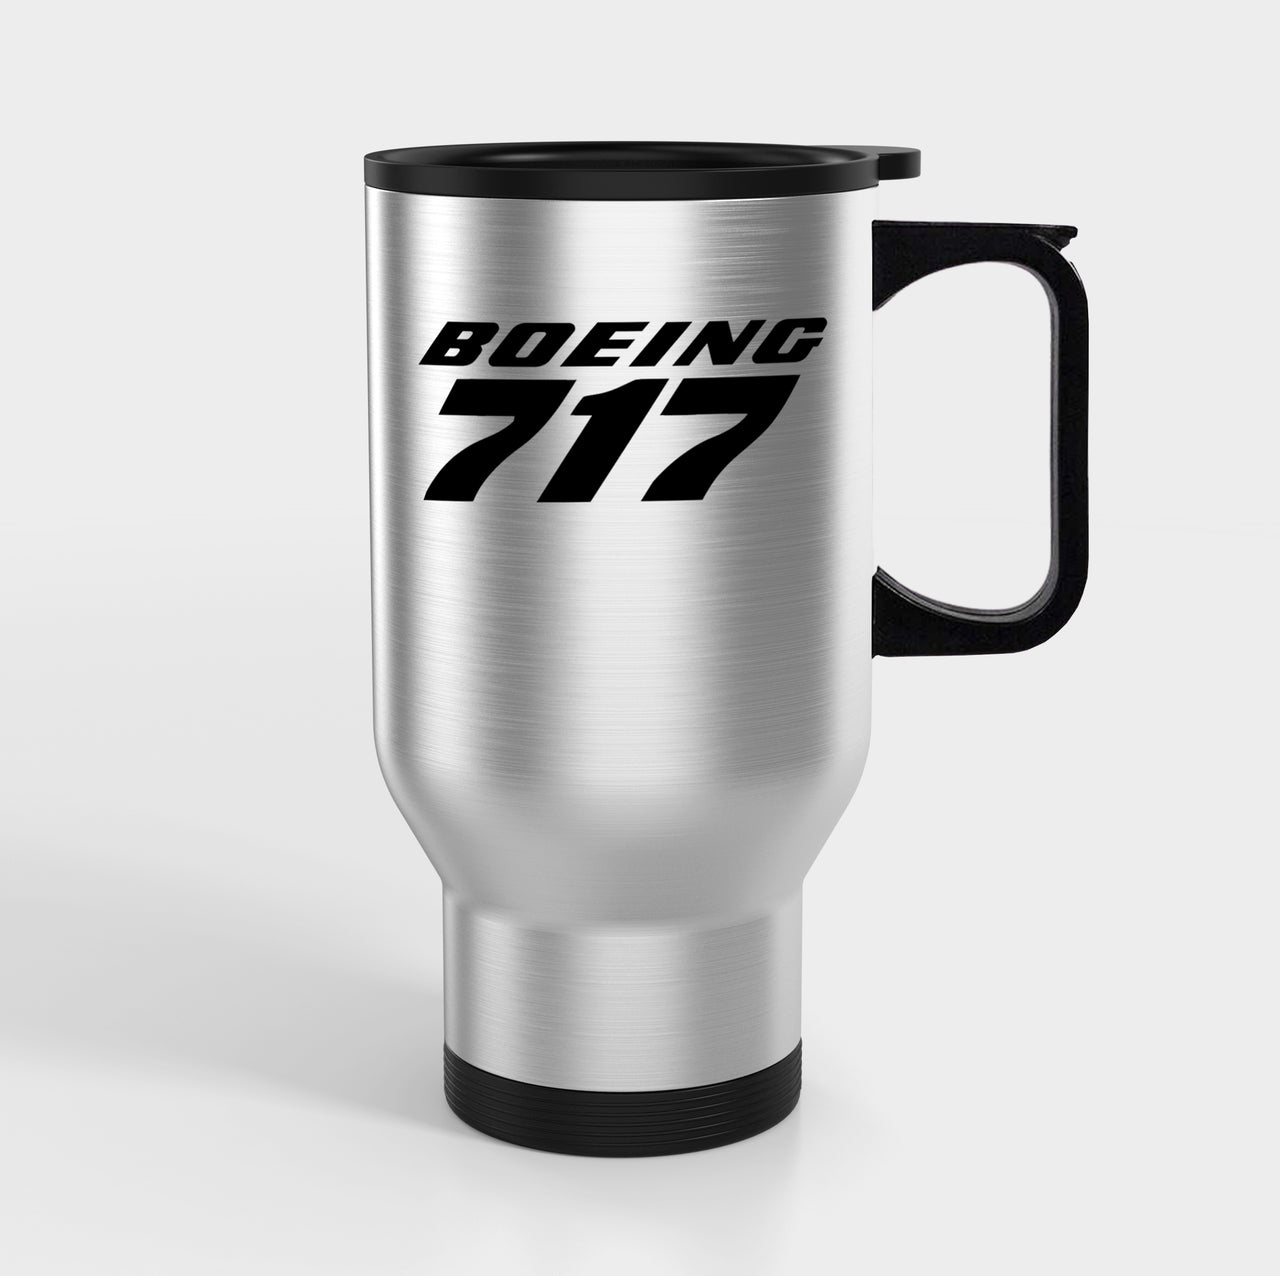 Boeing 717 & Text Designed Travel Mugs (With Holder)